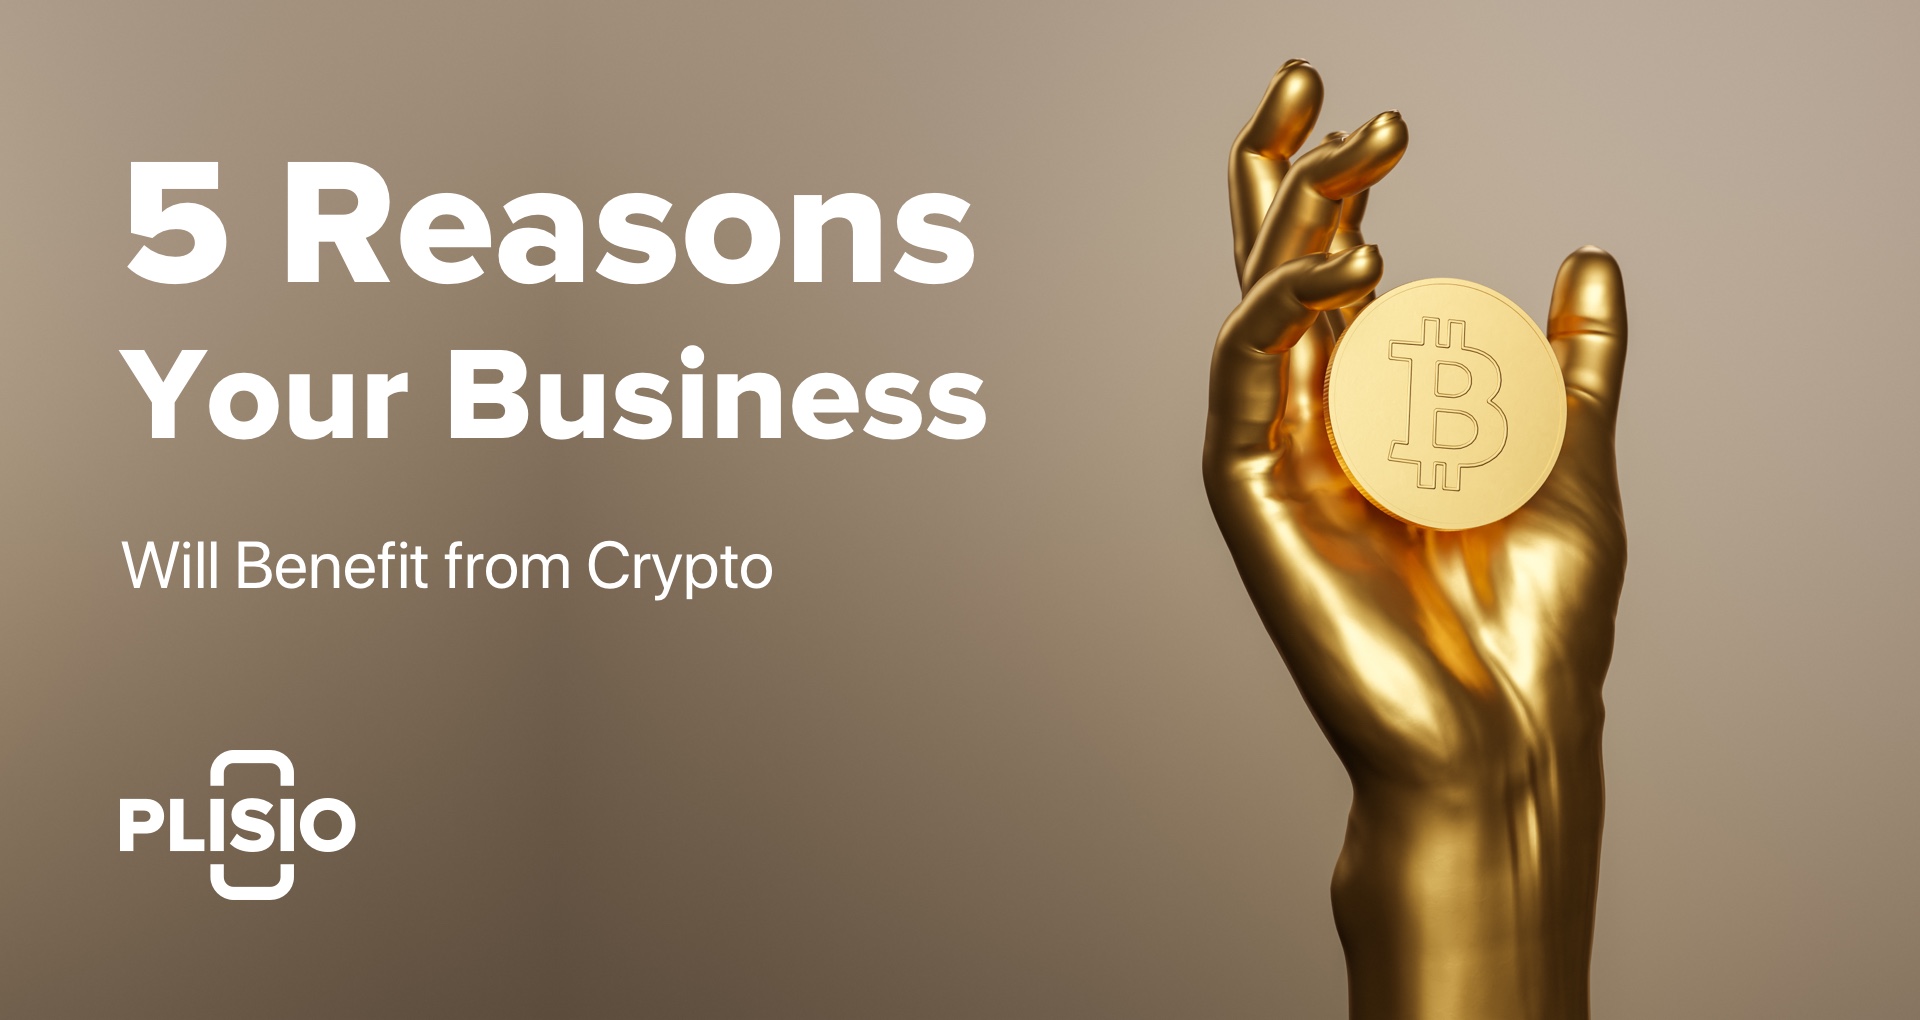 5 Reasons Your Business Will Benefit from Crypto